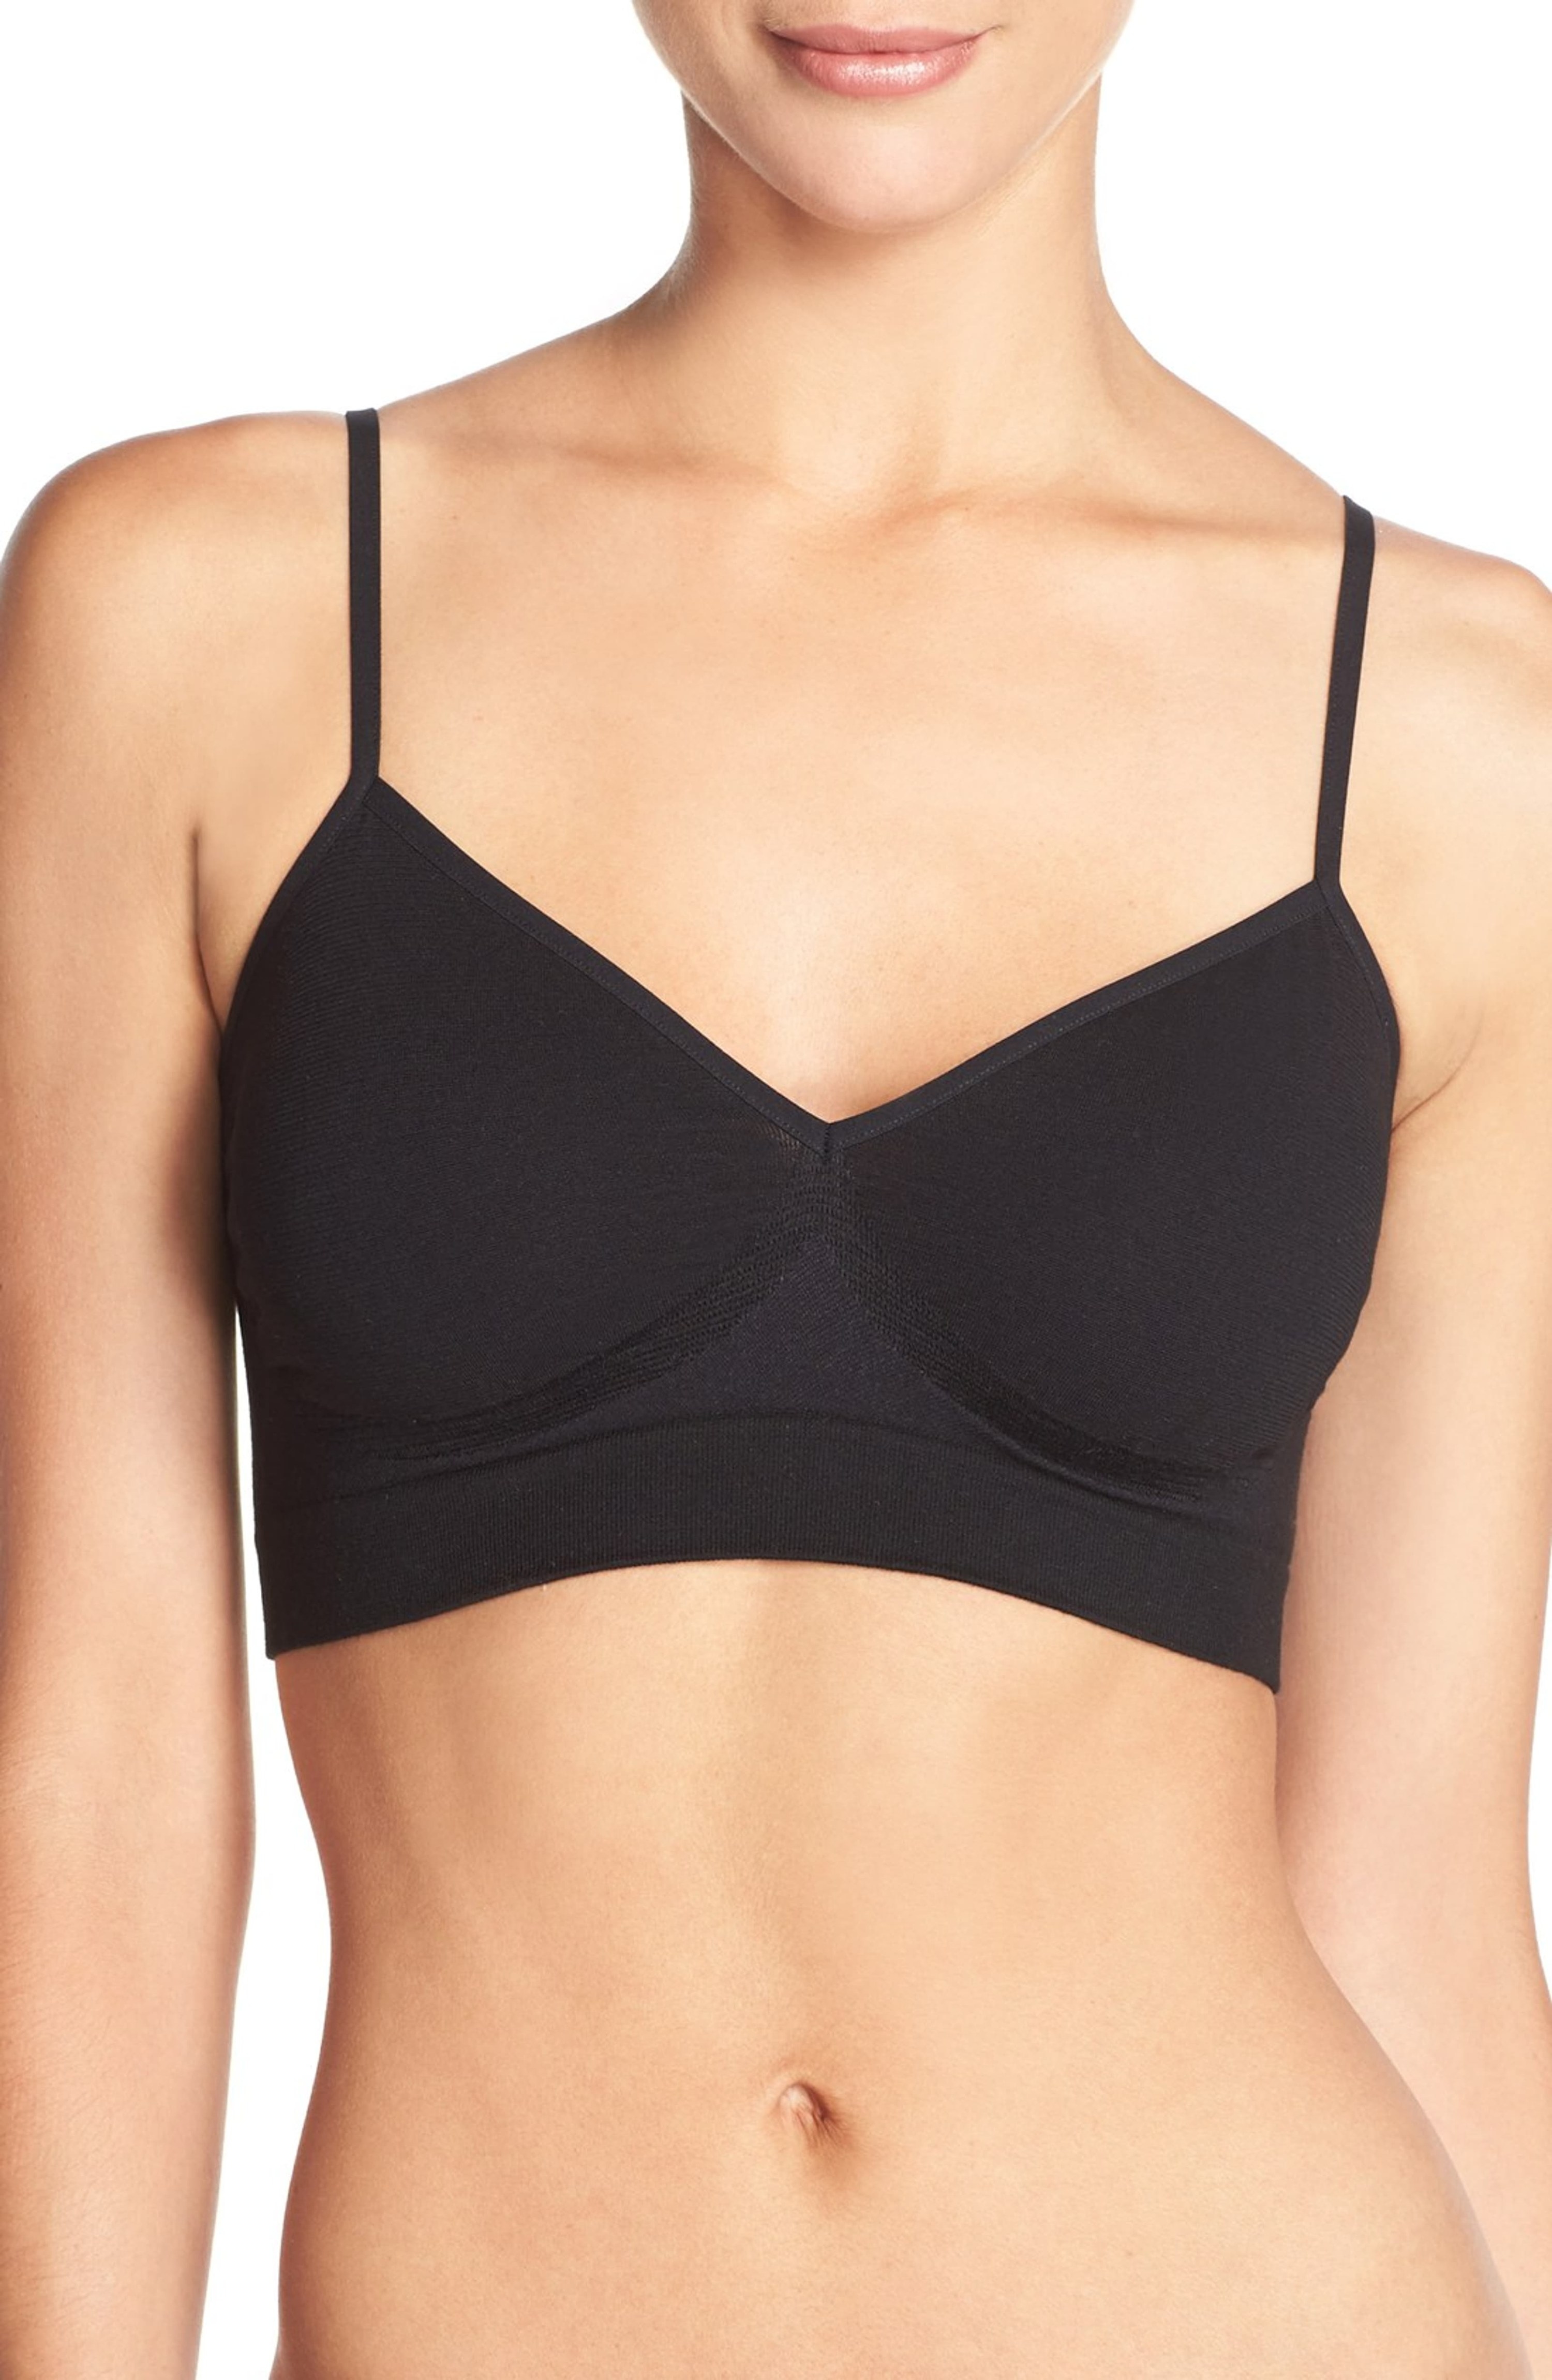 model wearing the black bra which fits like a cropped top and has spaghetti straps like a camisole or tank top